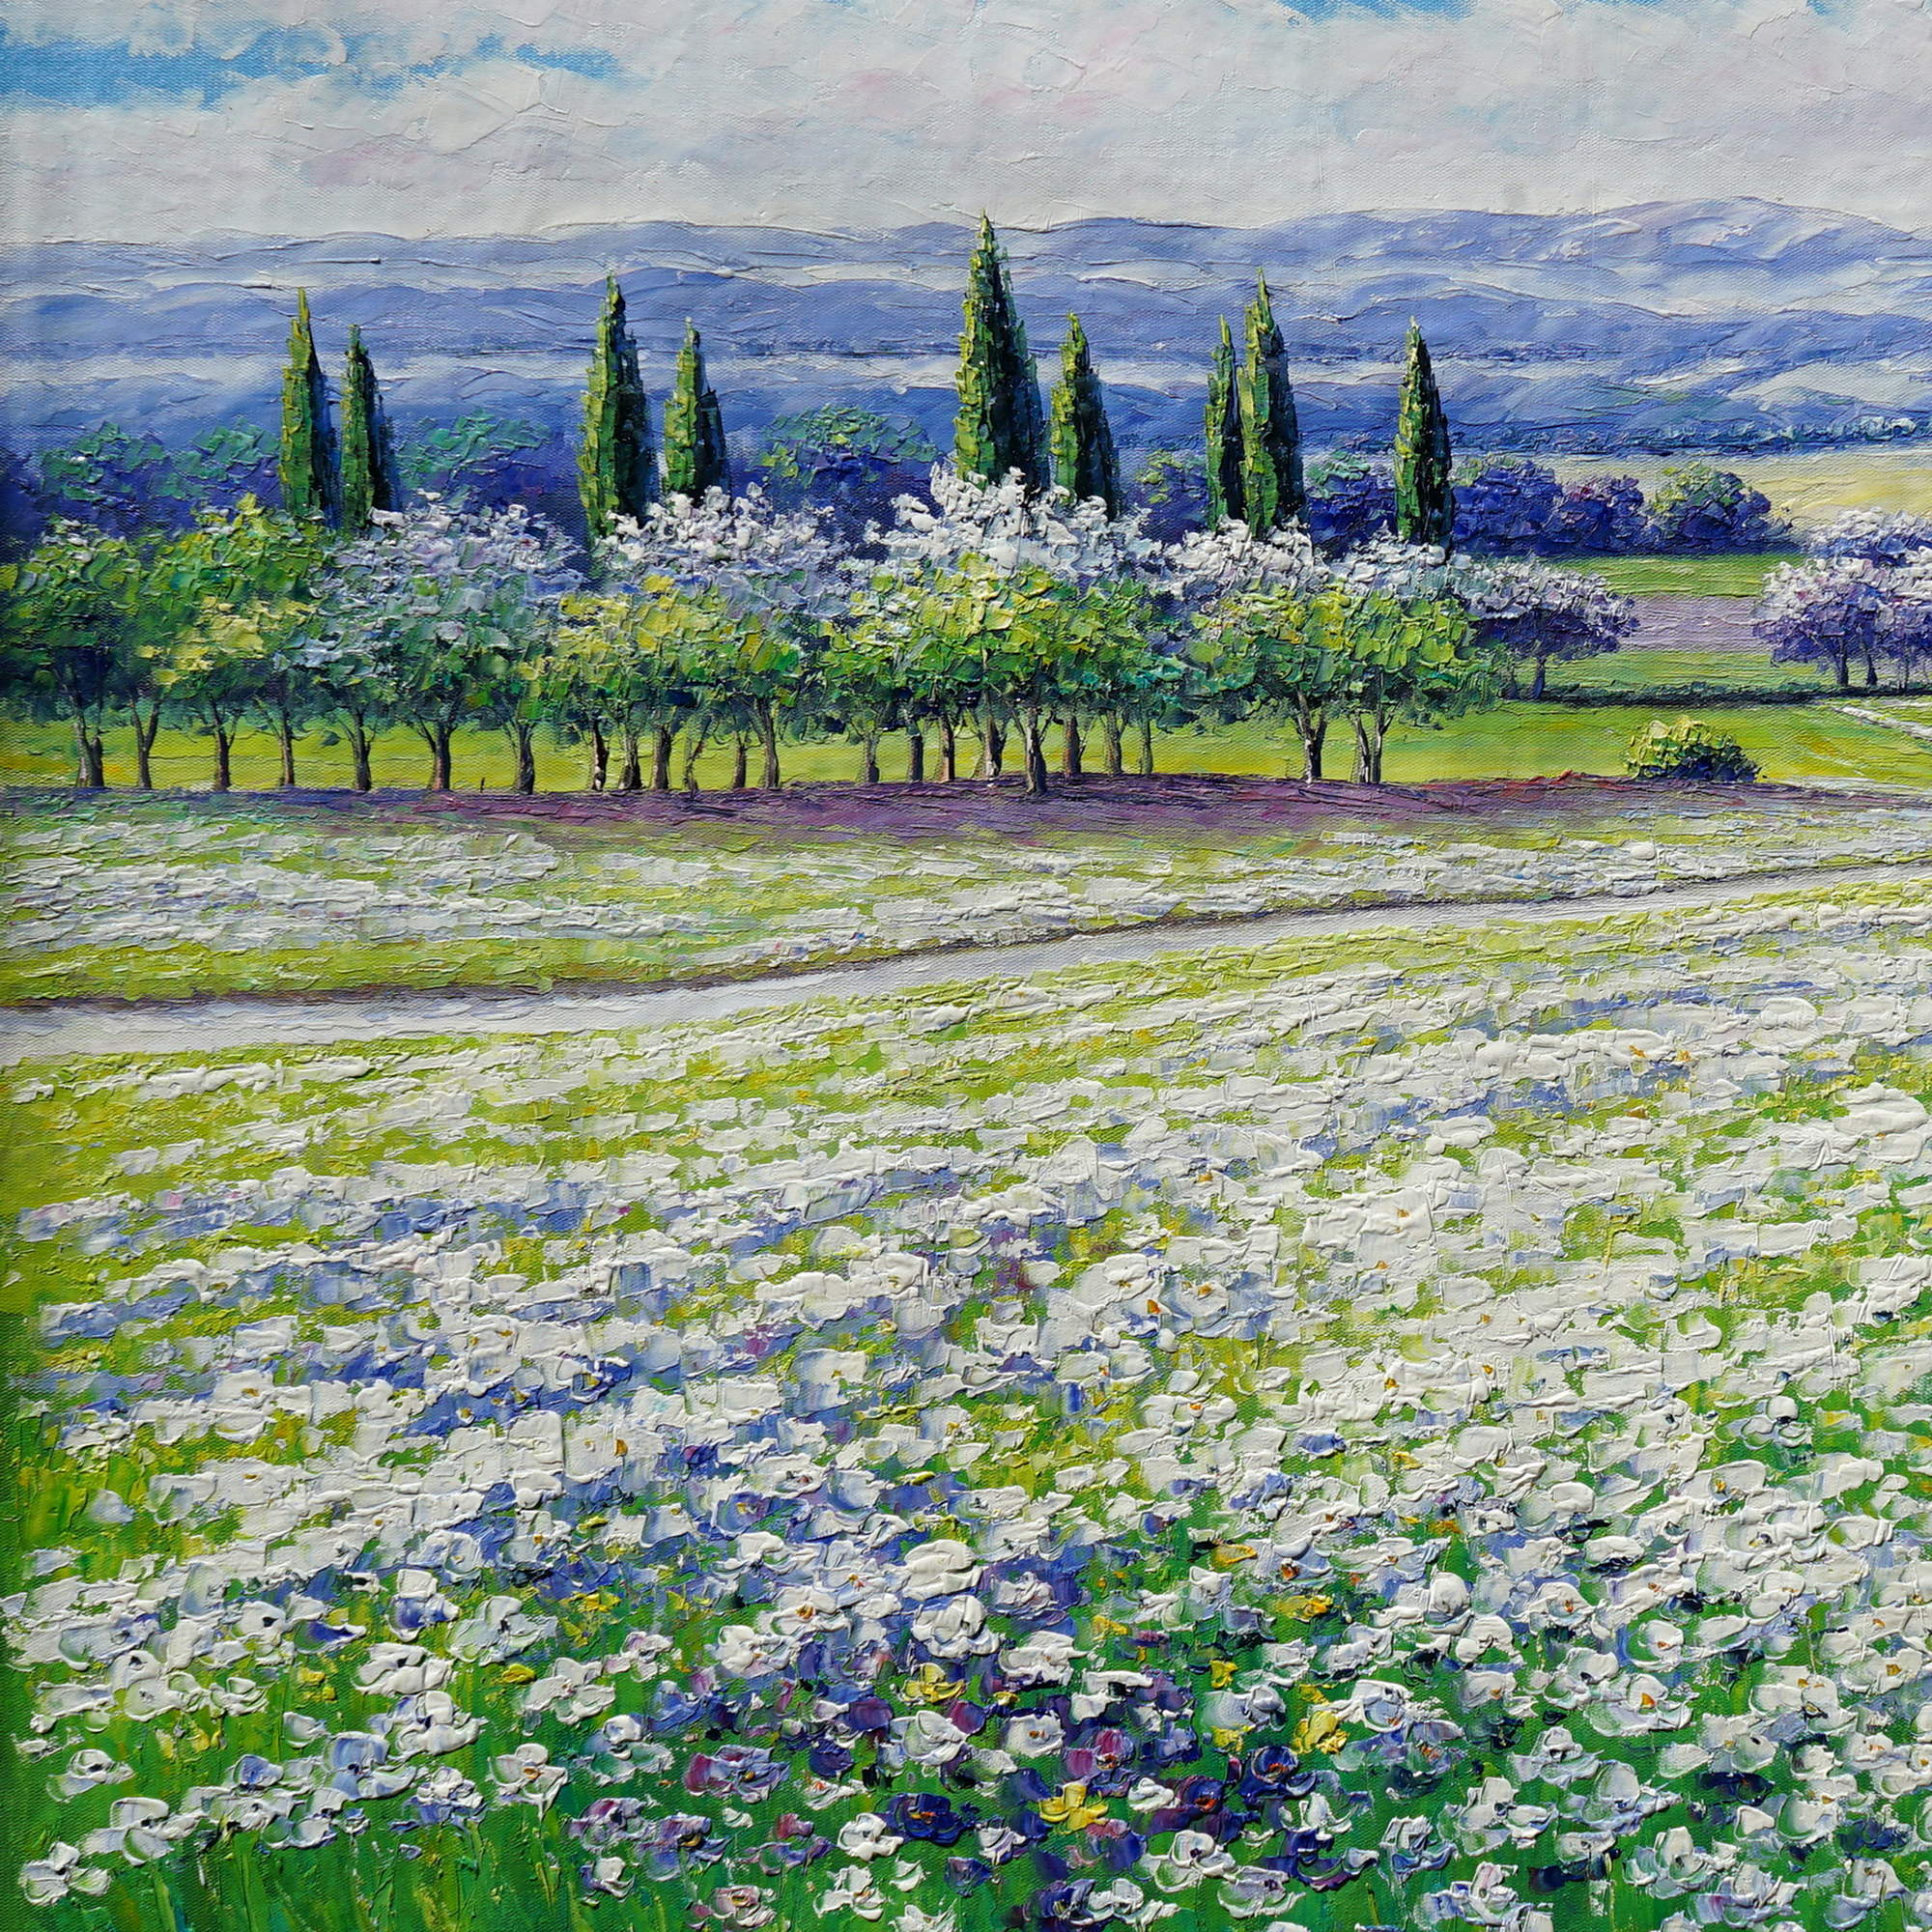 Hand painted Tuscan hills with daisies in bloom 75x100cm